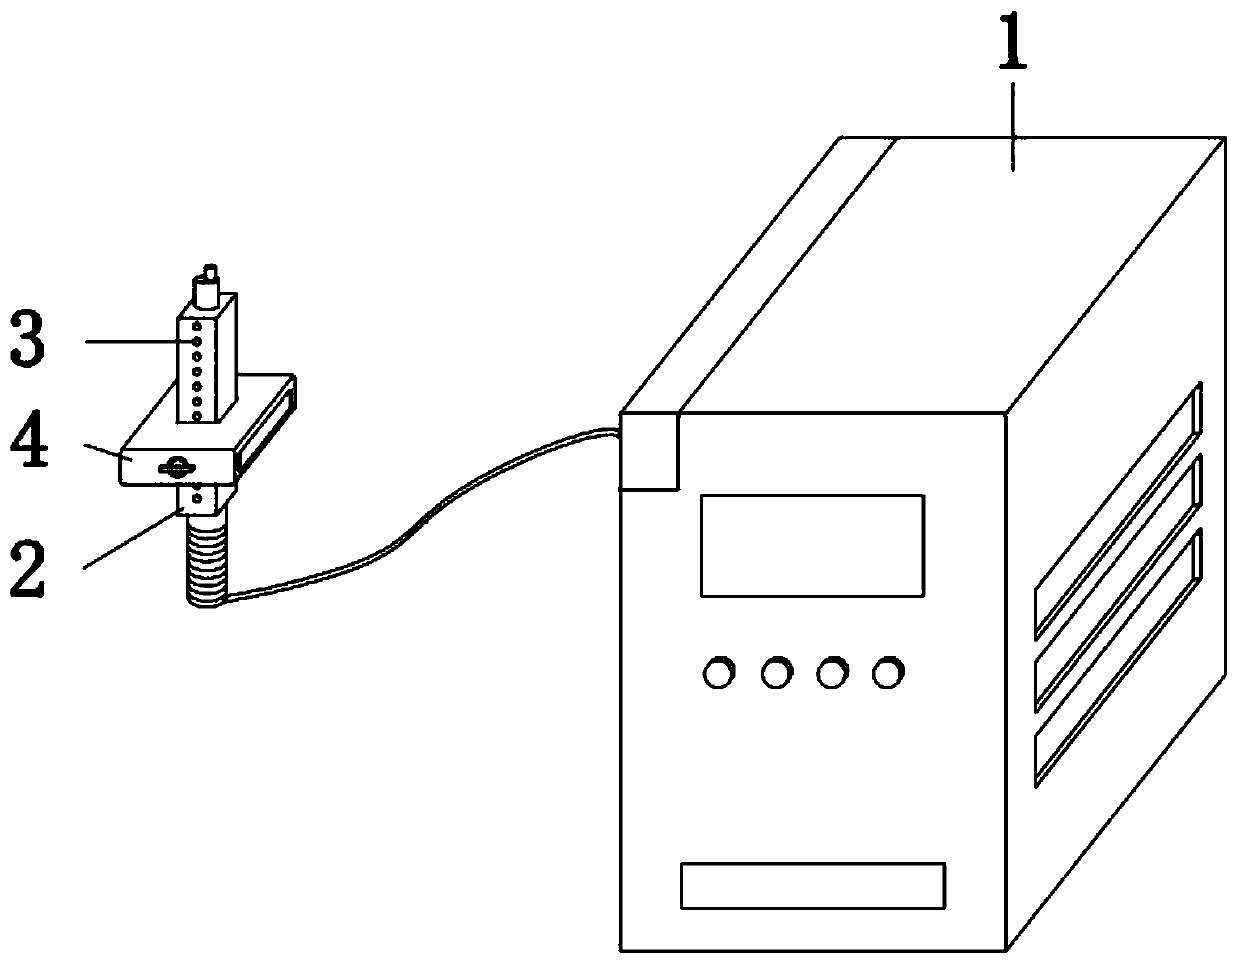 Respiratory tract cleaning device